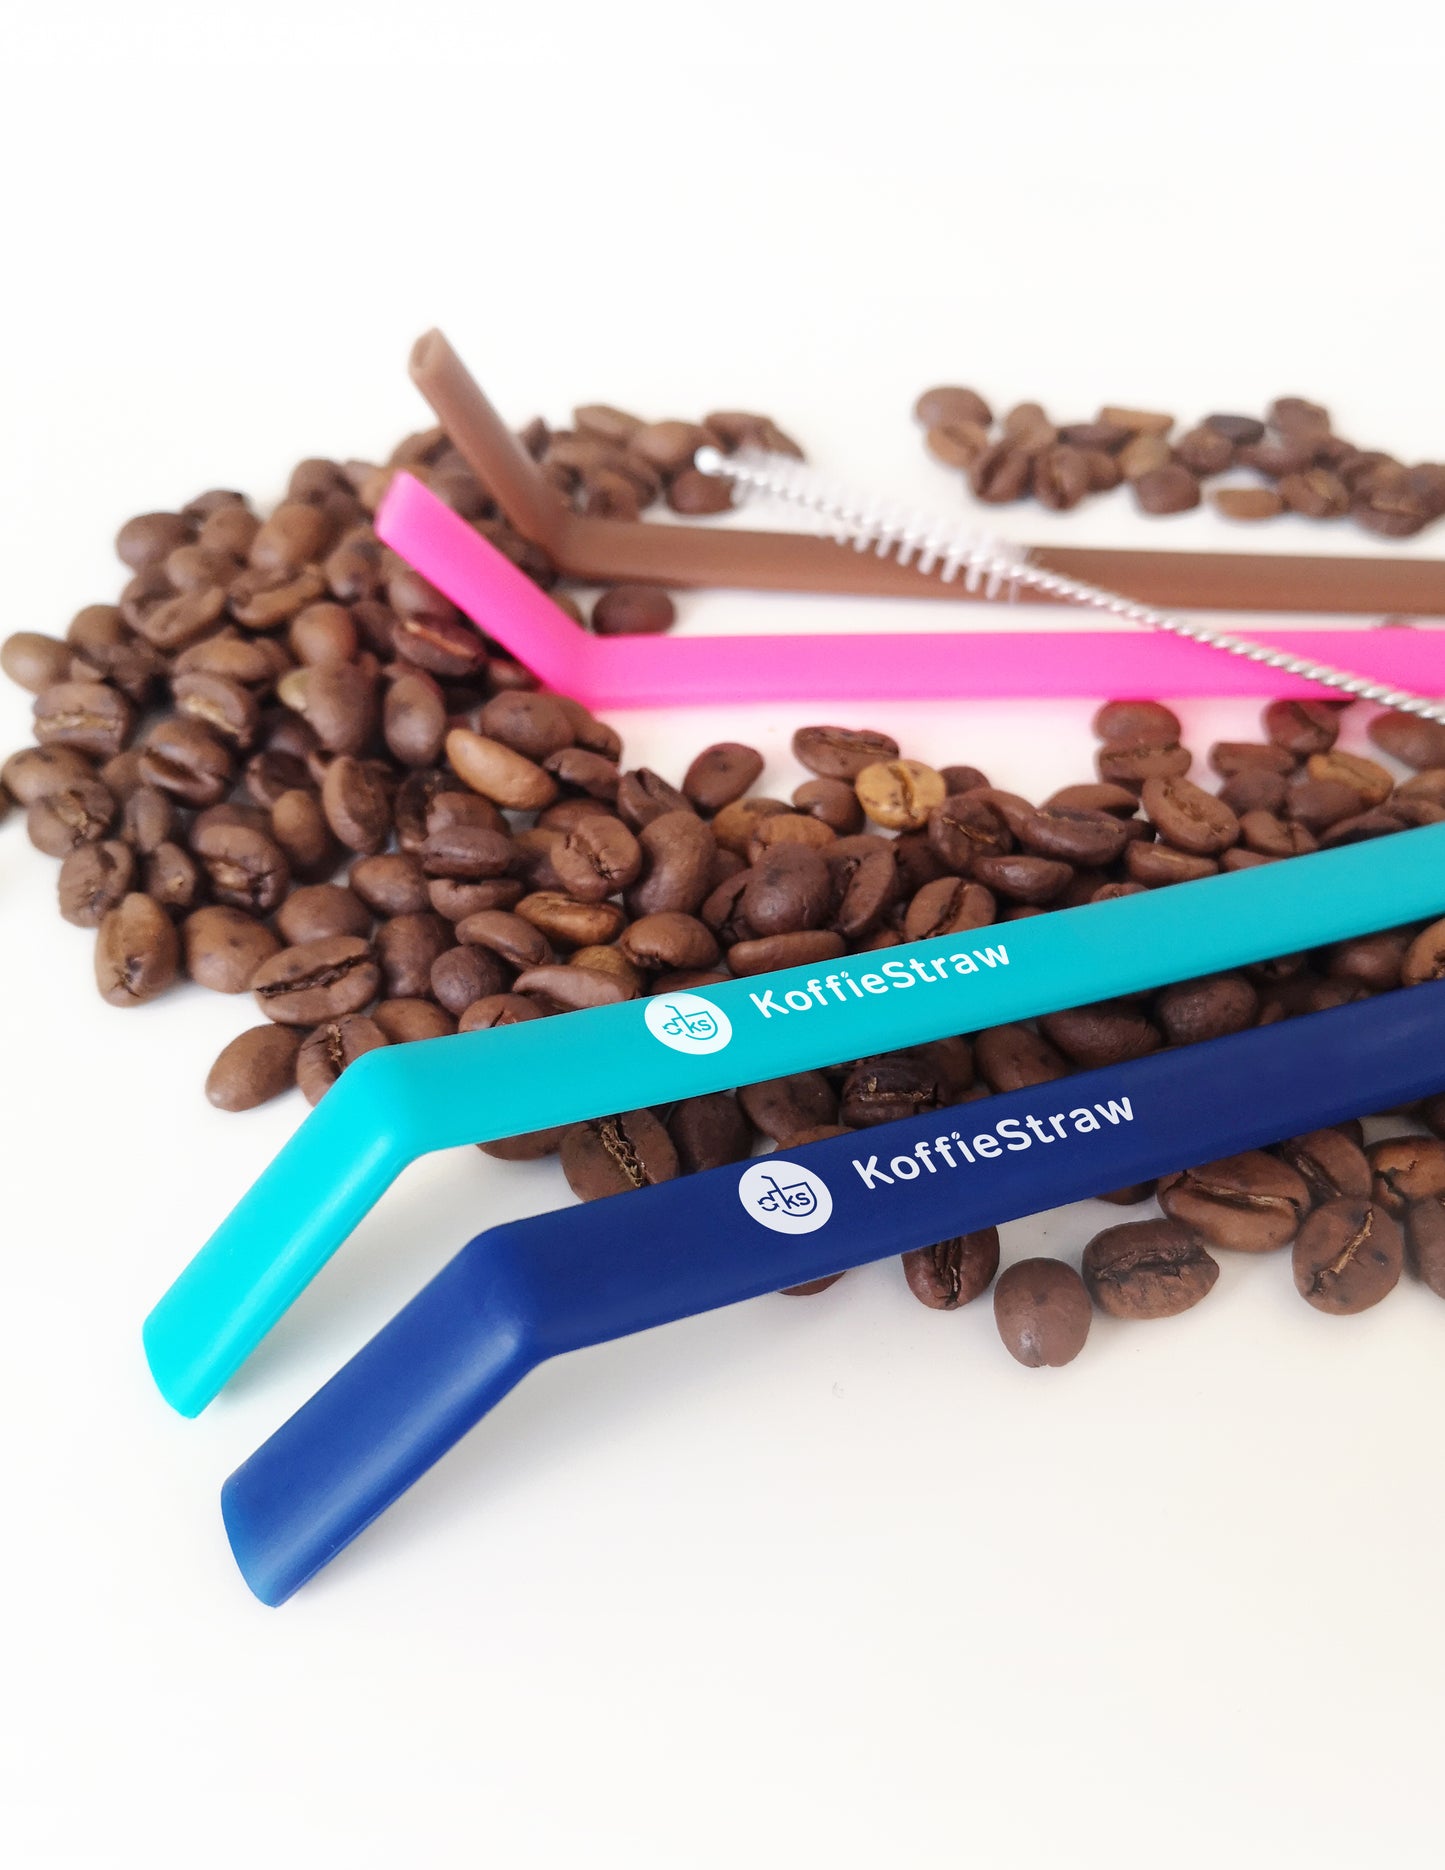 4-Pack of KoffieStraw: Mocha, Navy, Pink, Surf (all 10") with stainless steel cleaning brush in home-compostable packaging